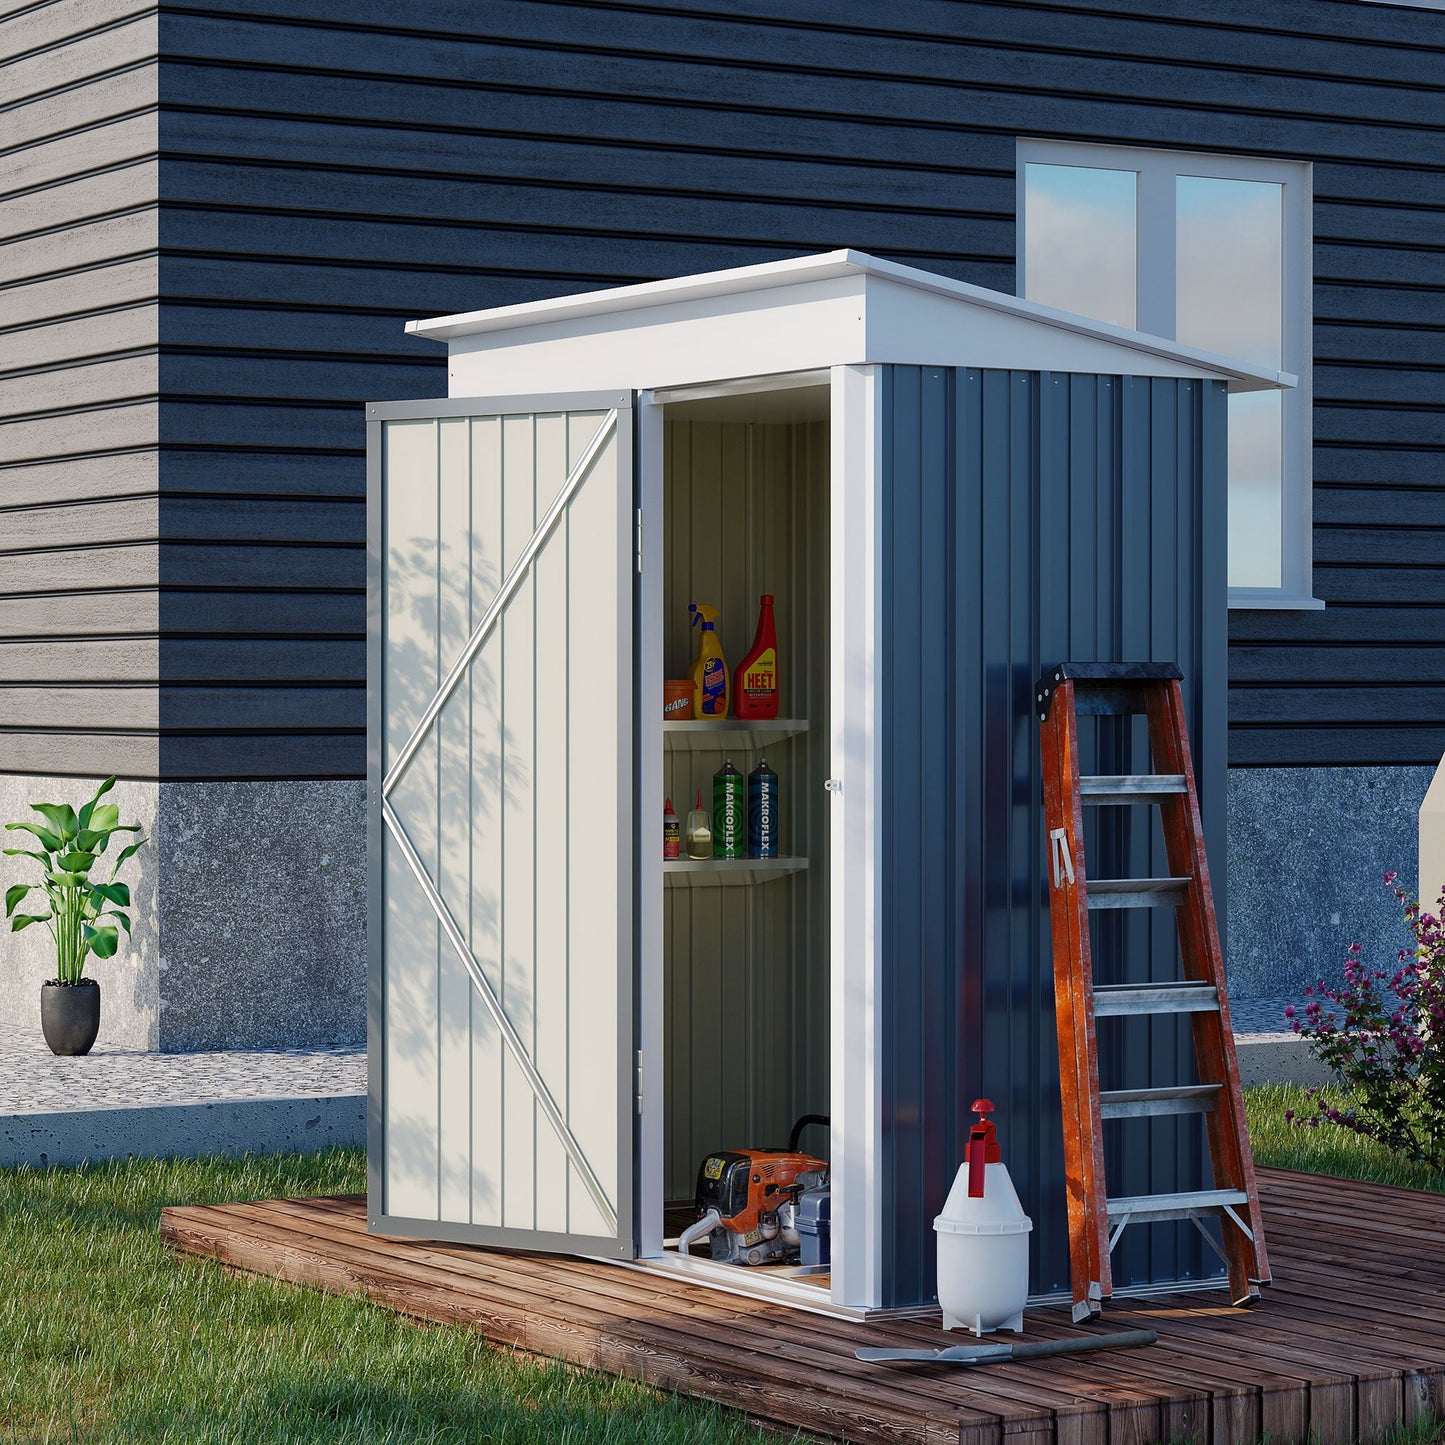 Outdoor and Garden-5'x3'x6' Garden Metal Sheds with floor, Small Lean-to Shed with Adjustable Shelf, Lock, Gloves, Cool Gray - Outdoor Style Company